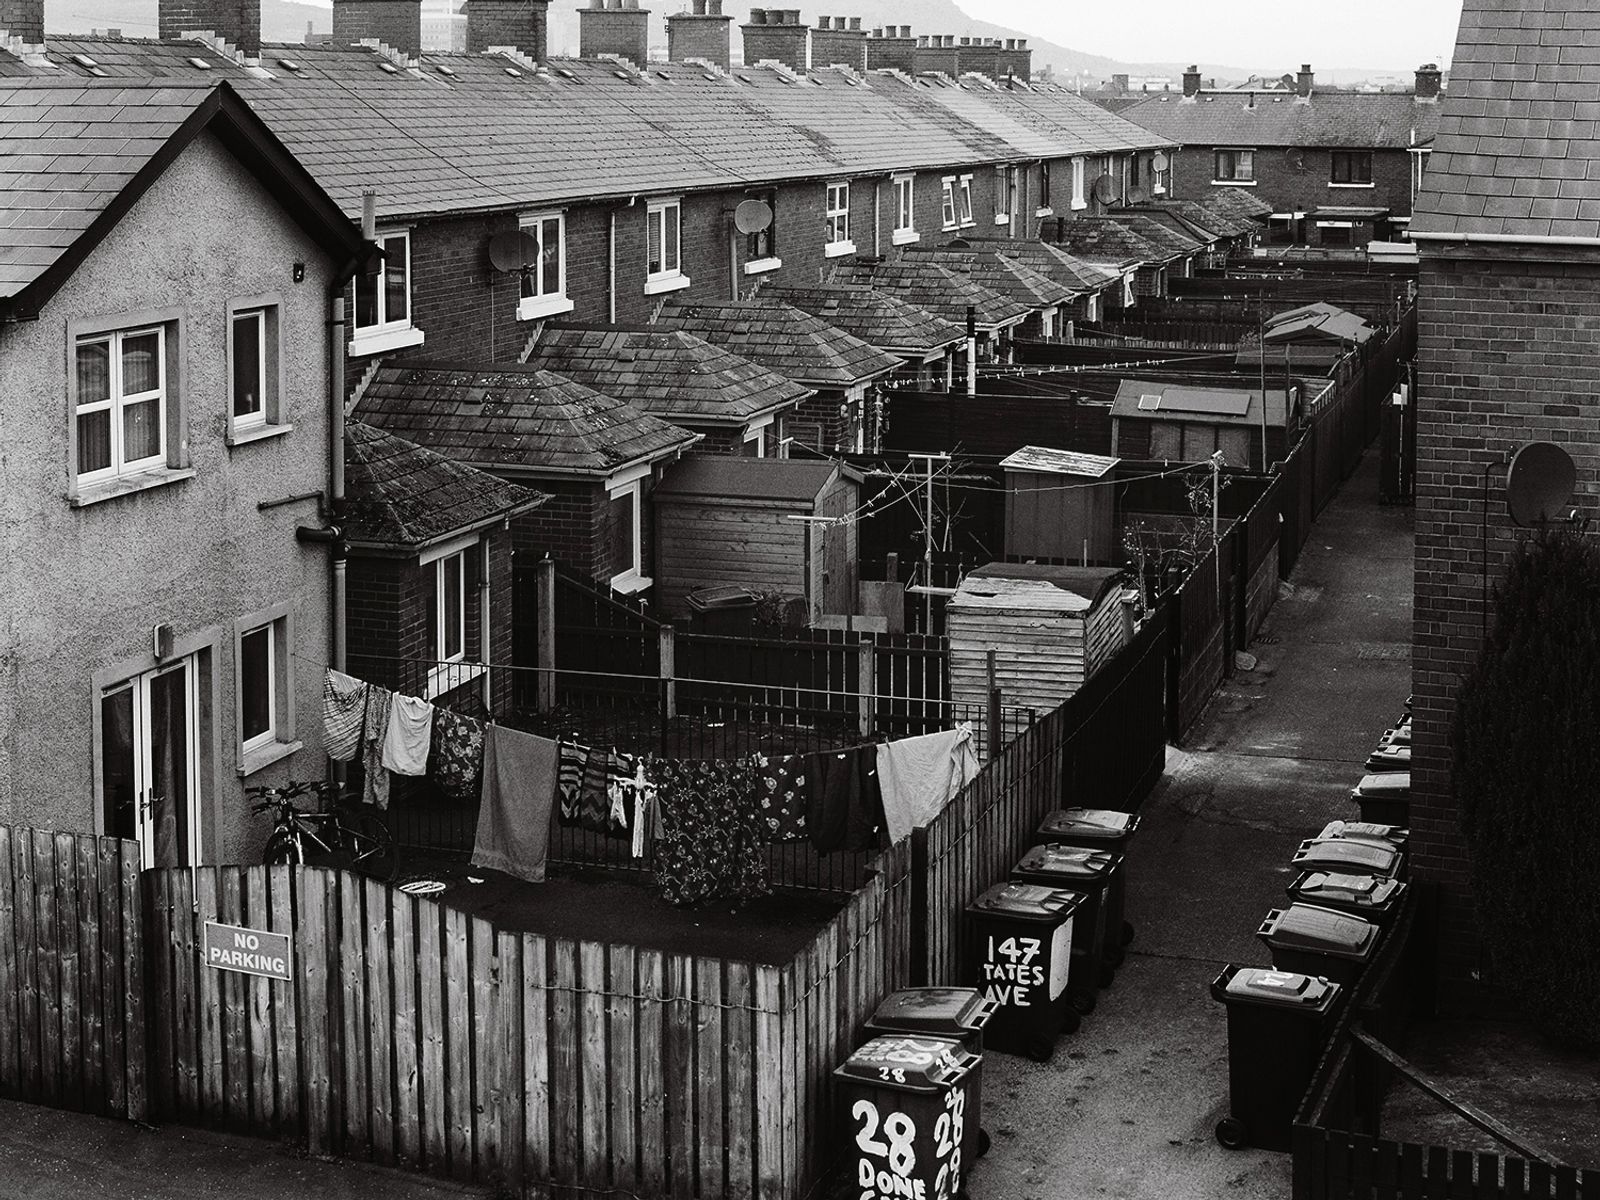 © Toby Binder - Belfast, The Village. Backyard view at Tates Ave.